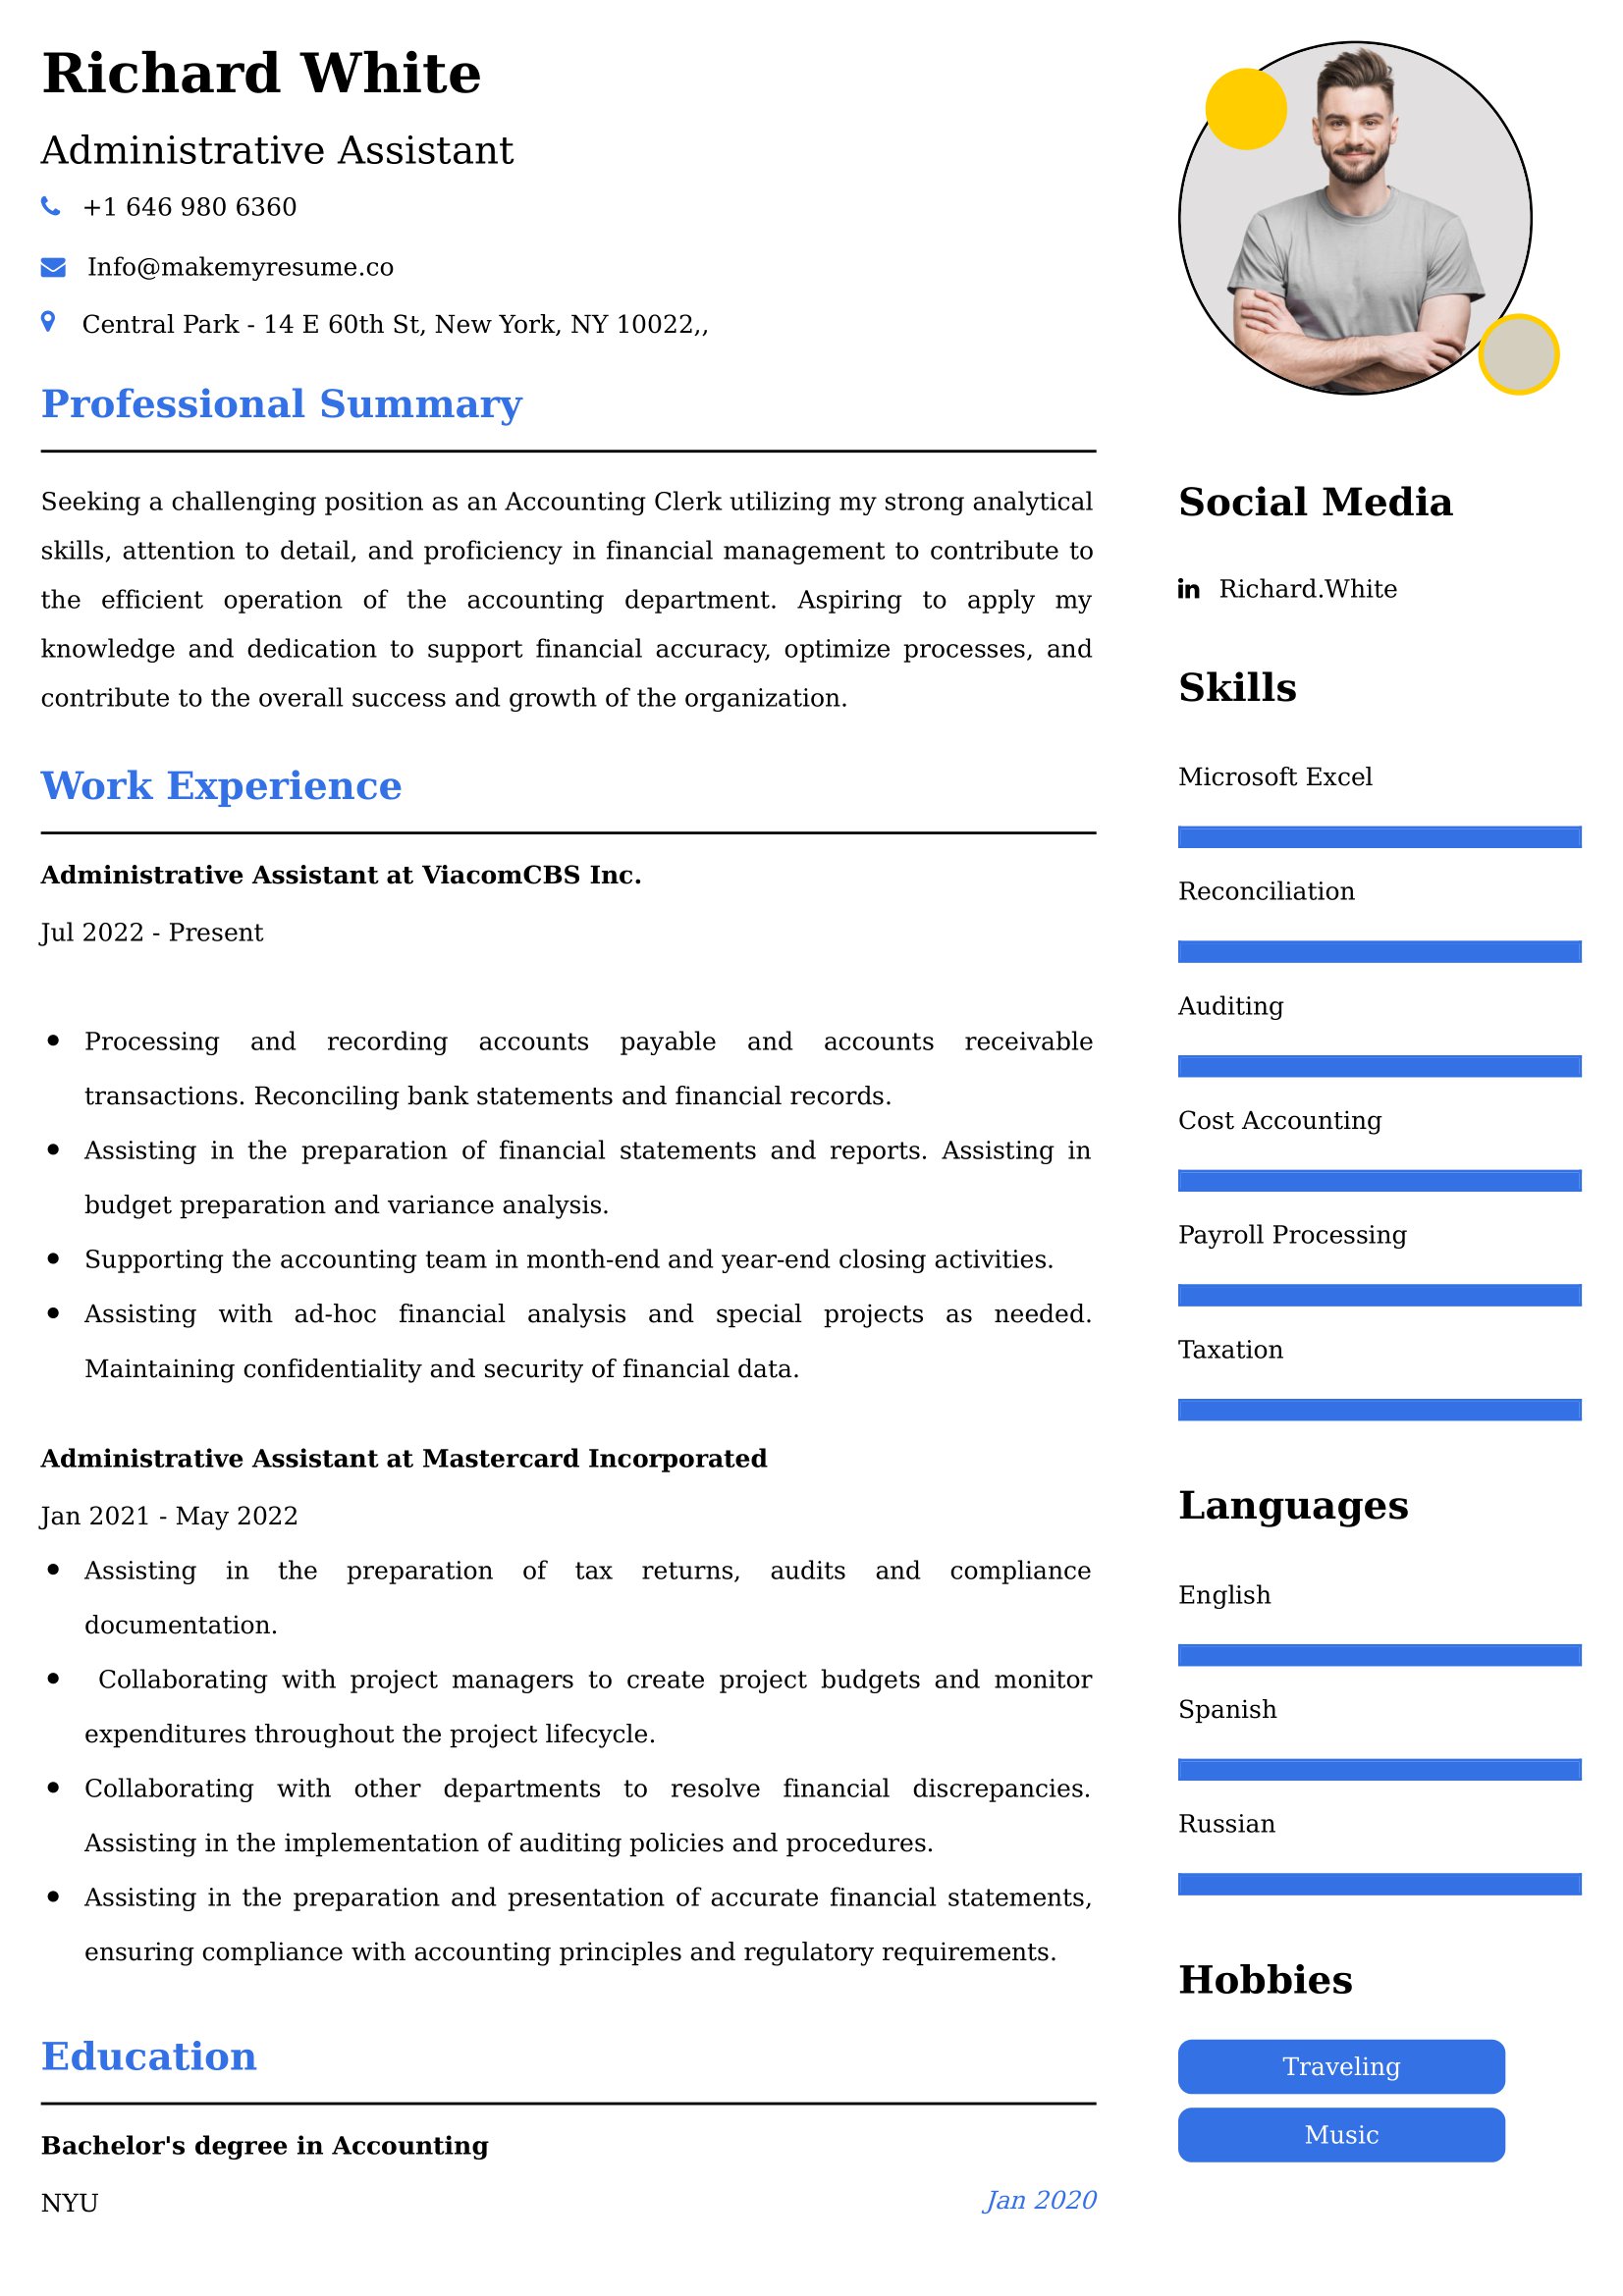 Administrative Assistant Resume Examples for UK Jobs - Tips and Guide